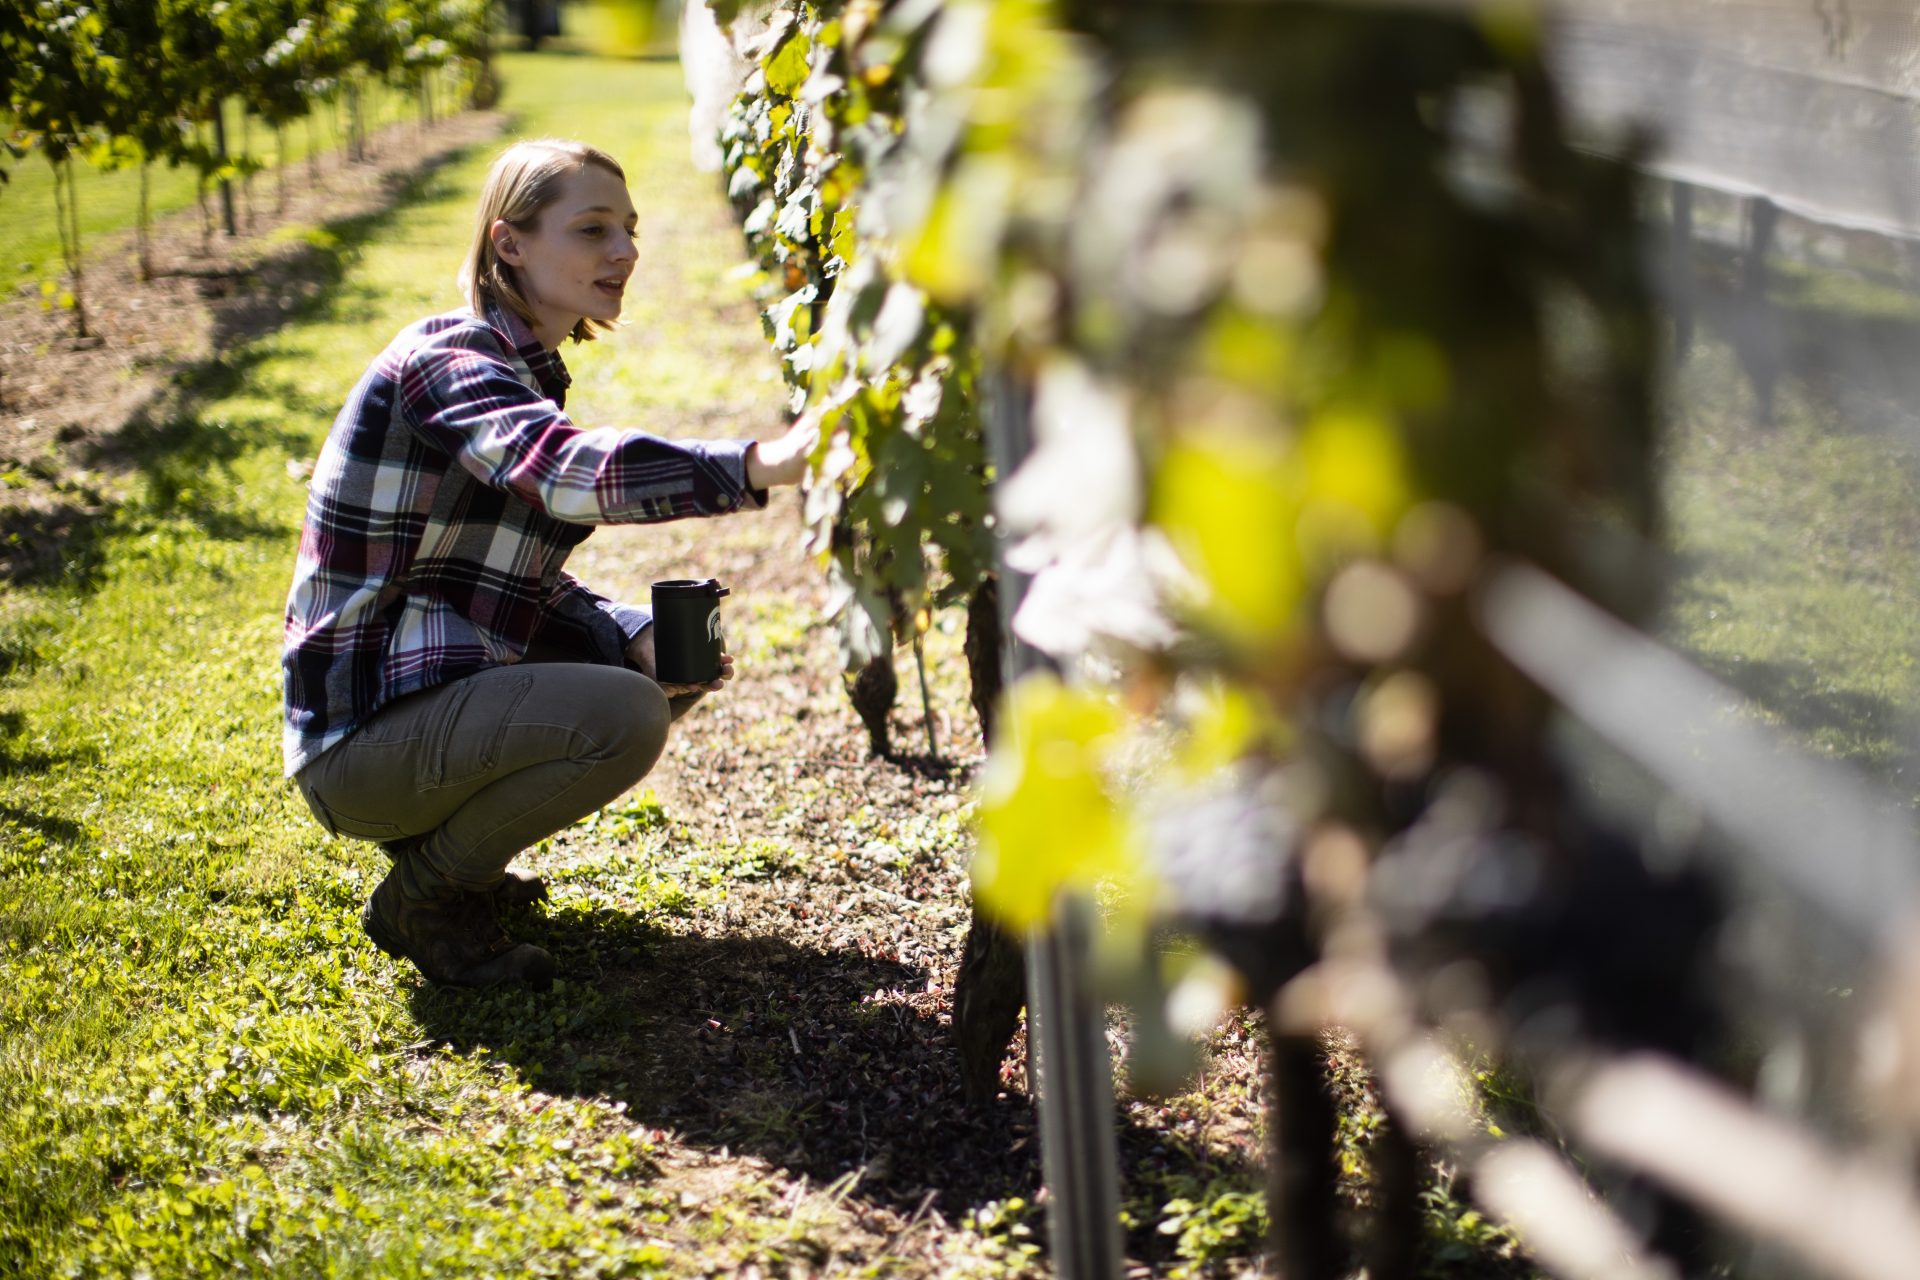 In this Thursday, Sept. 19, 2019, photo, Heather Leach, an entomologist who does lanternfly outreach at Penn State Extension inspect grape vines in Kutztown, Pa. The spotted lanternfly has emerged as a serious pest since the federal government confirmed its arrival in southeastern Pennsylvania five years ago this week.